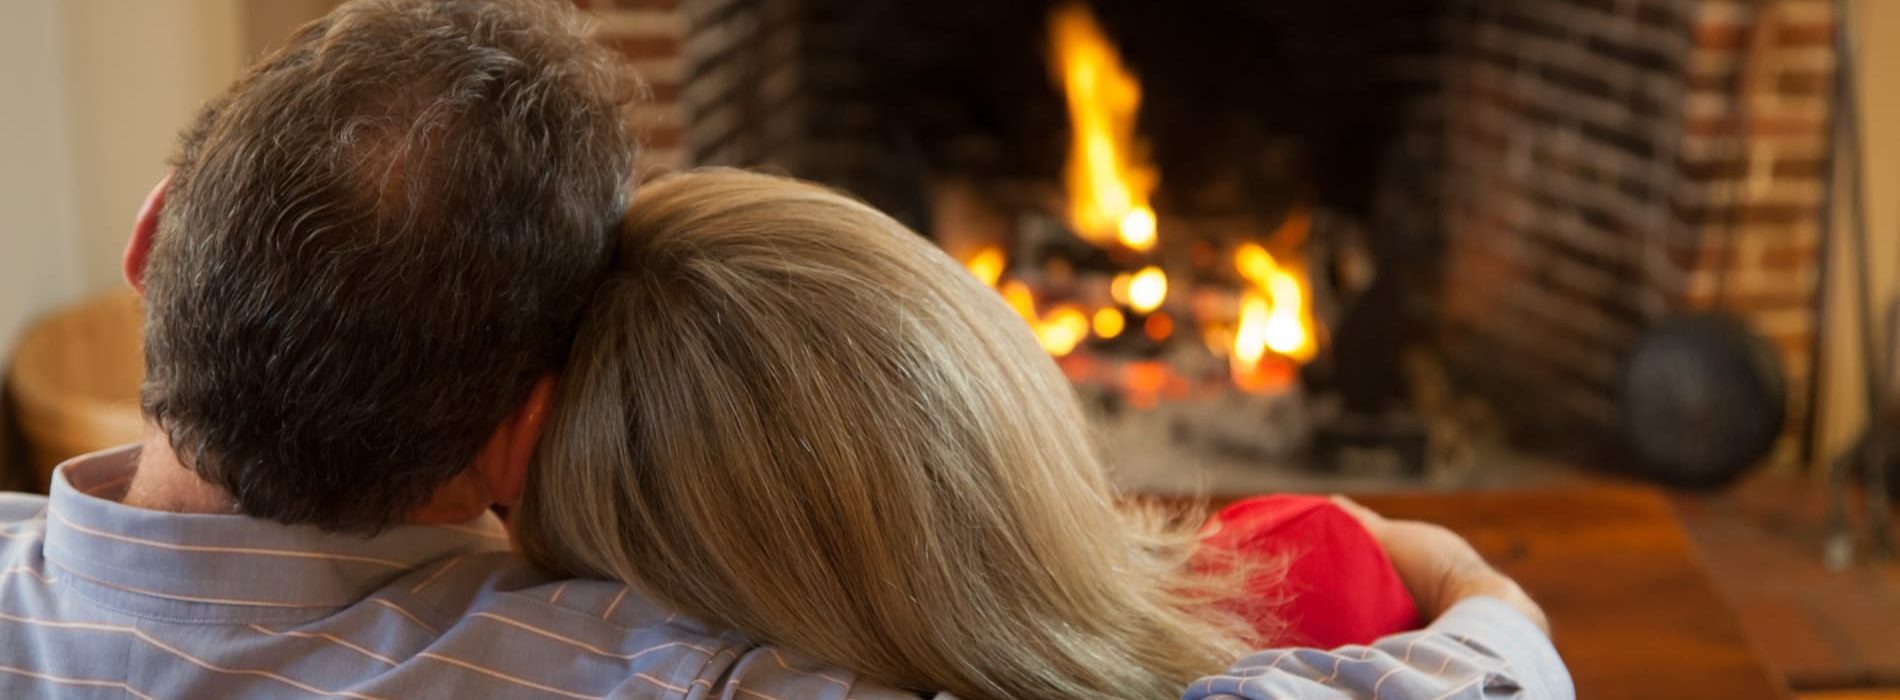 snuggling couple in front of a fireplace|Best Mothers Day gift ideas|Great Mothers Day gift ideas|best mothers day gifts|mothers day gift ideas